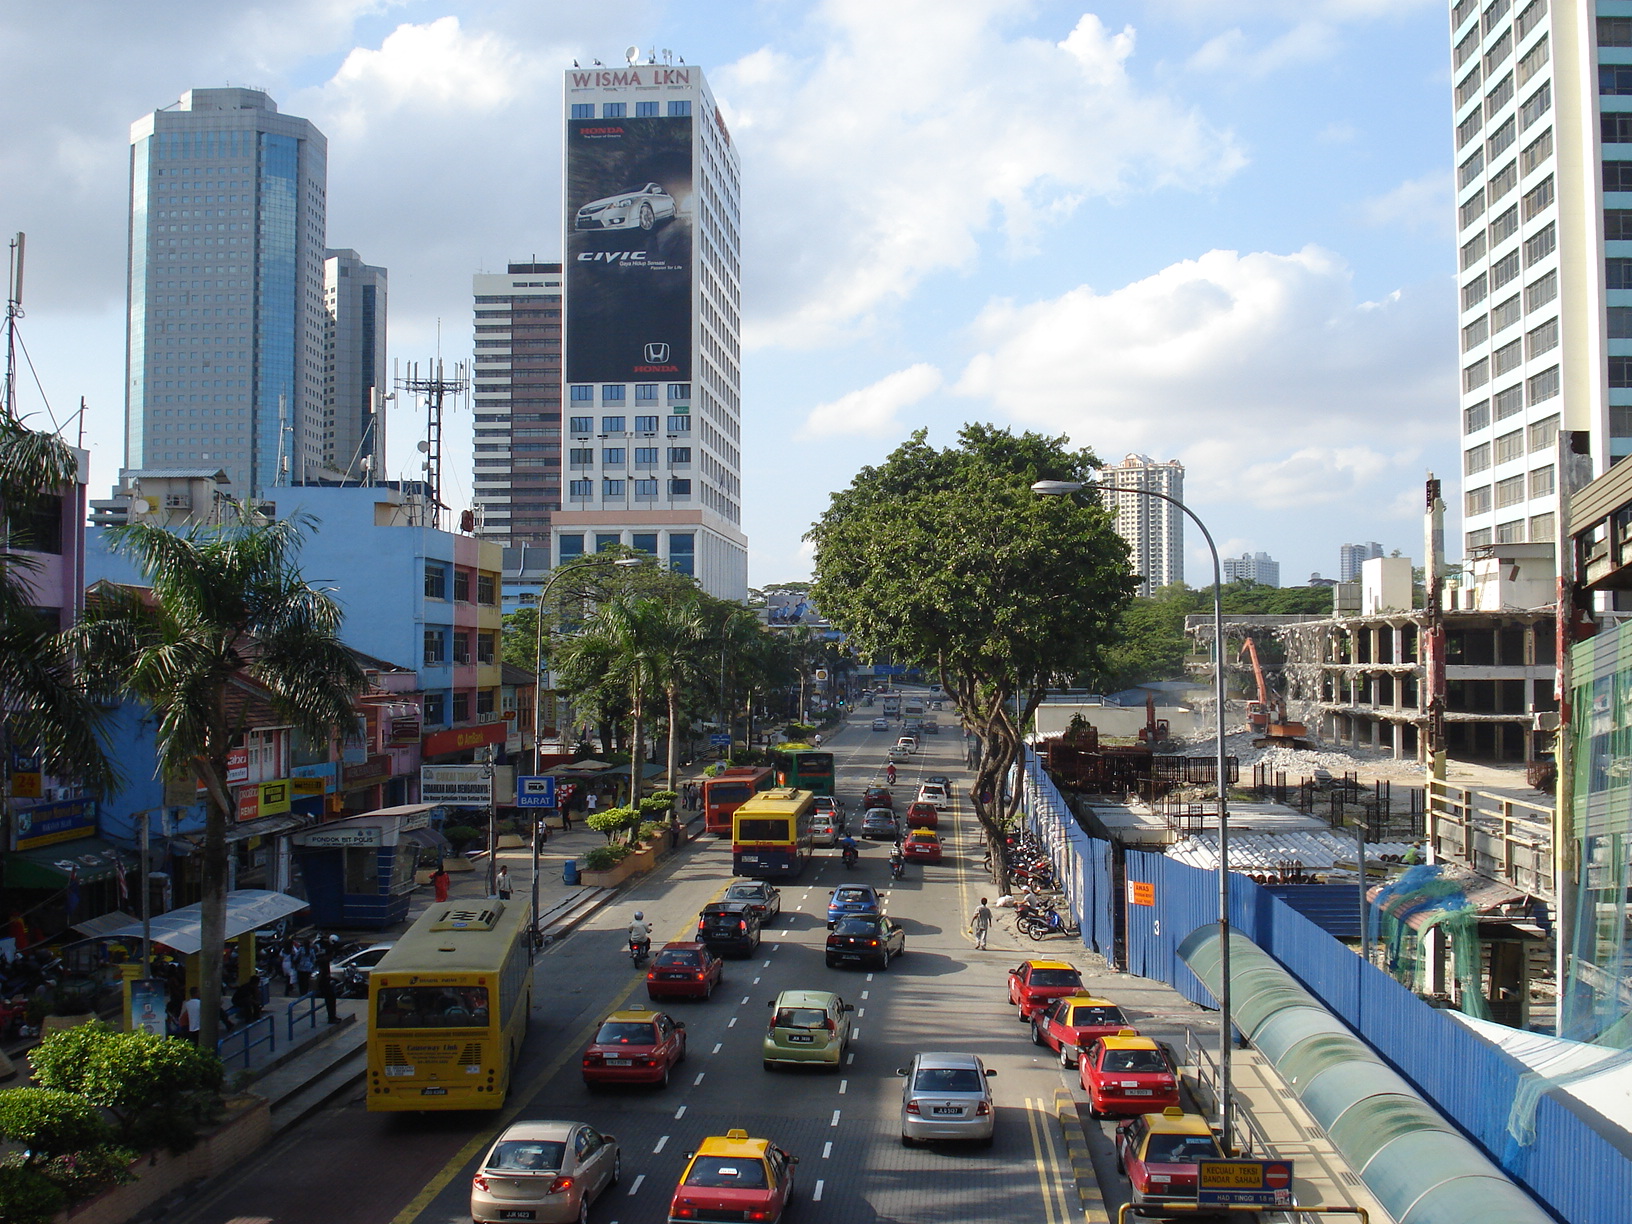 Jalan_Wong_Ah_Fook_with_traffic_flow_to_the_north_viewed_from_pedestrian_overhead_bridge_link_to_City_Square_Mall_-_panoramio